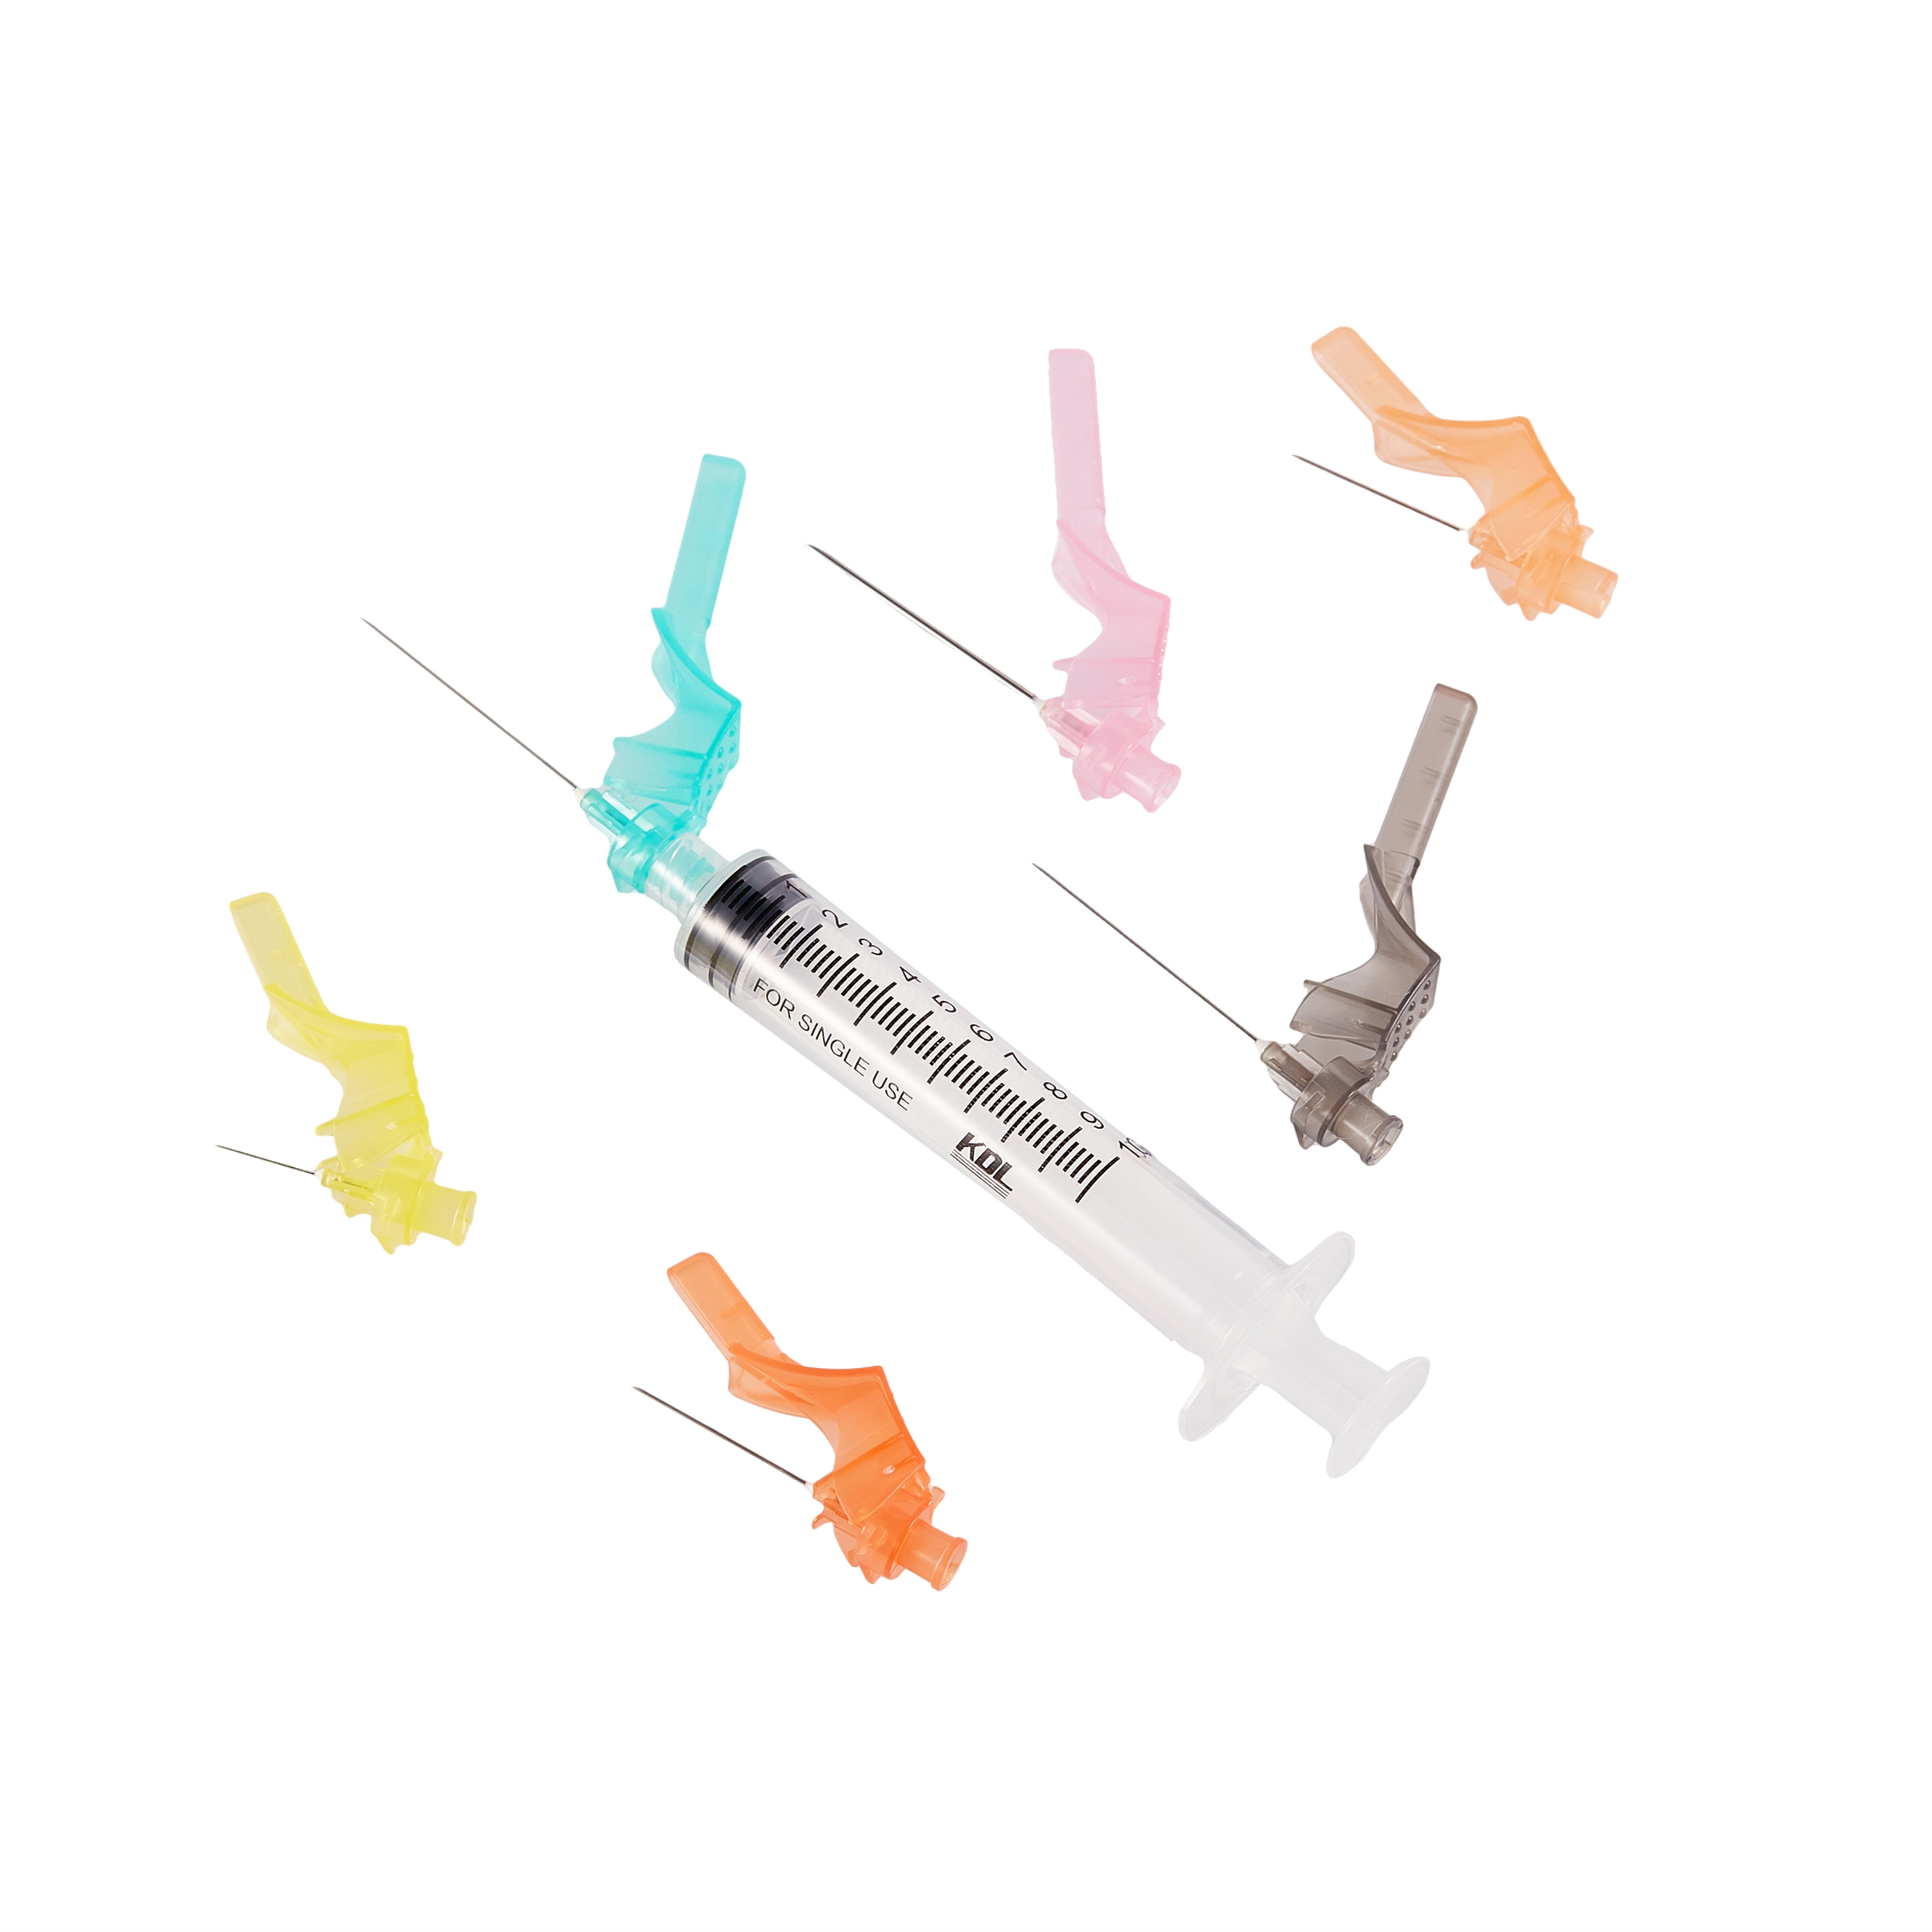 DISPOSABLE STERILE SYRINGES LUER LOCK LUER SLIP WITH SAFETY NEEDLE